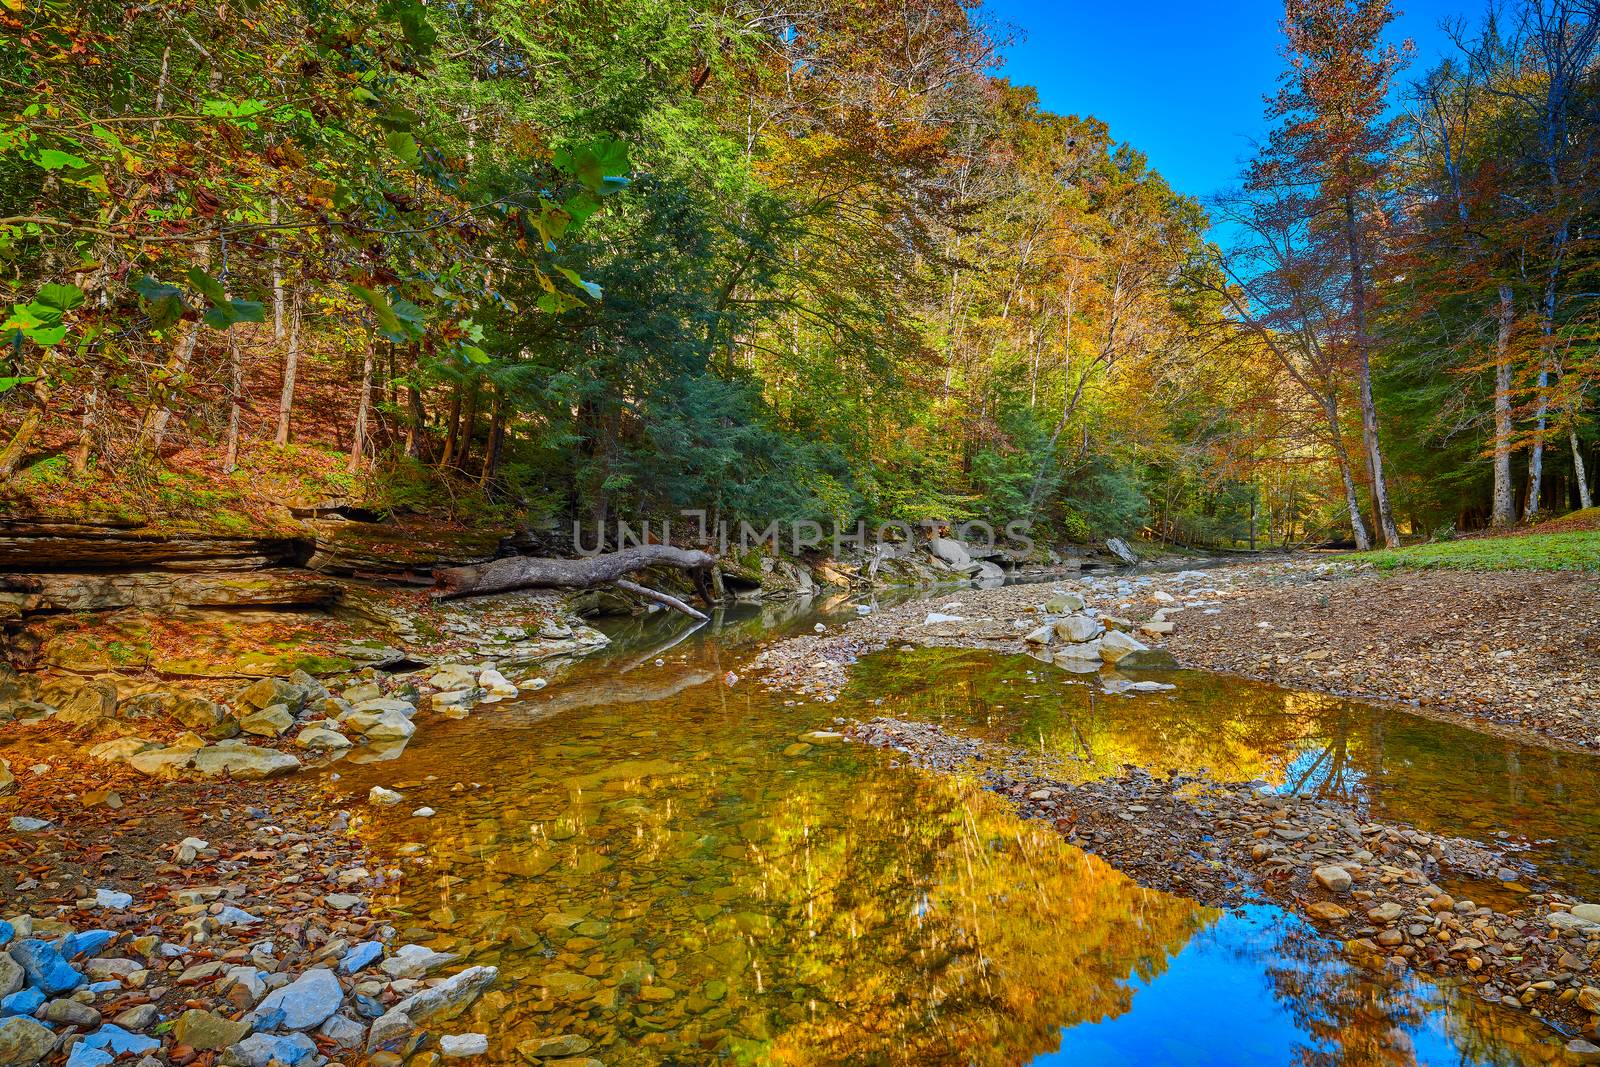 Colorful Fall leaves along War Creek next to Turkey Foot Campground in the Daniel Boone National Forest near McKee, KY.